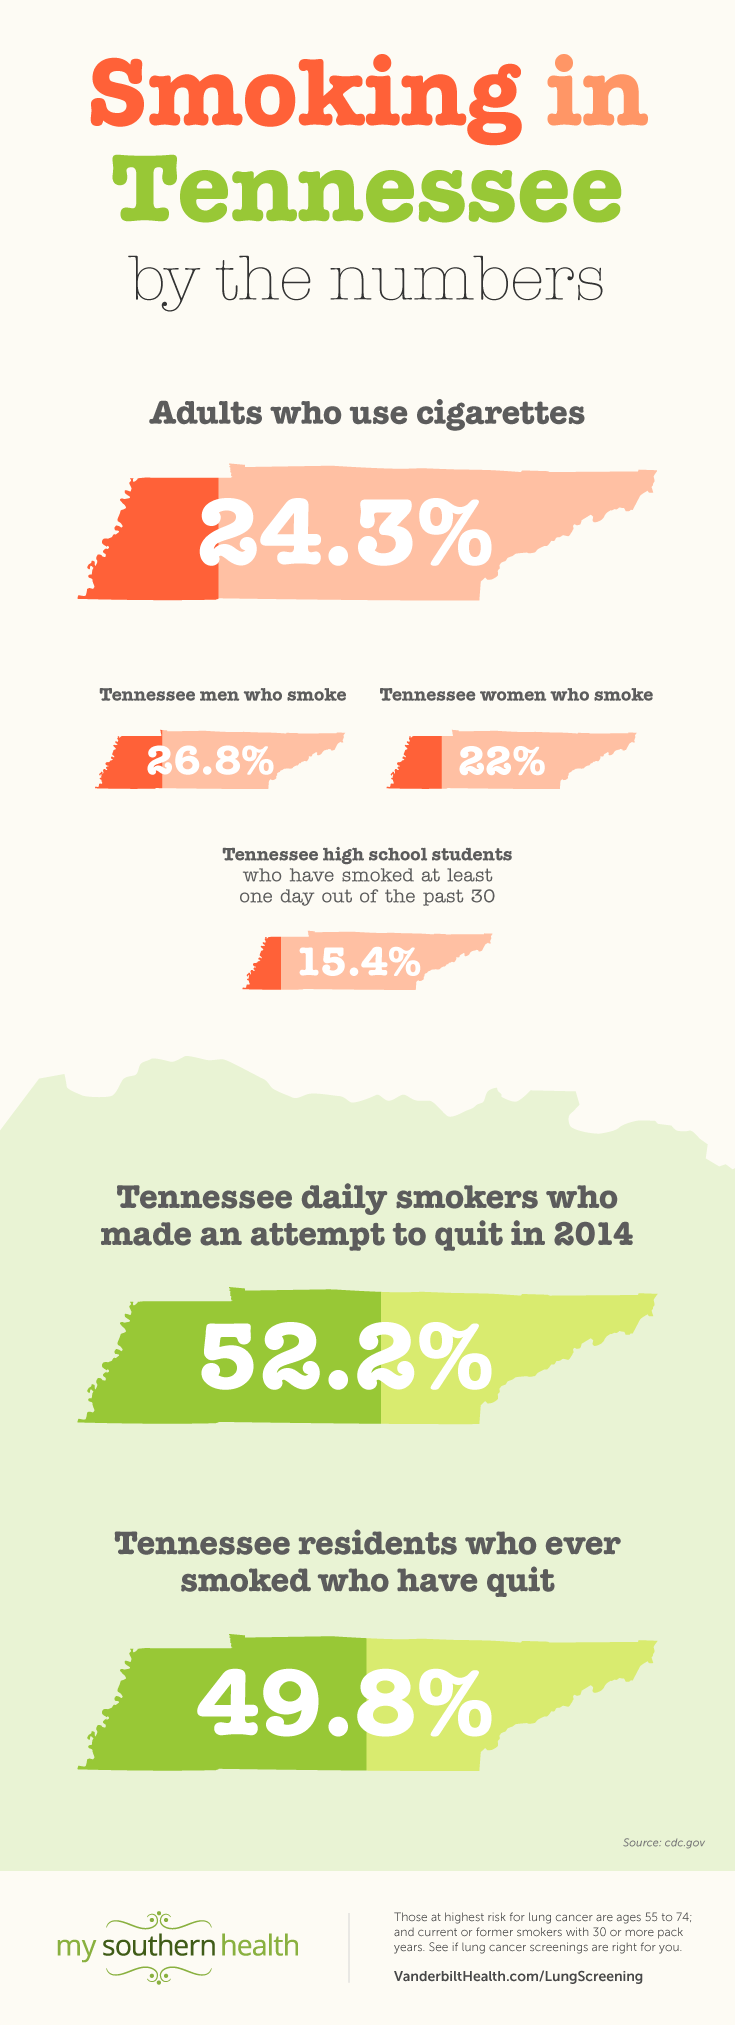 900-2898-MSH-TN-Cigarettes-Numbers-Infographic-MK-FINAL